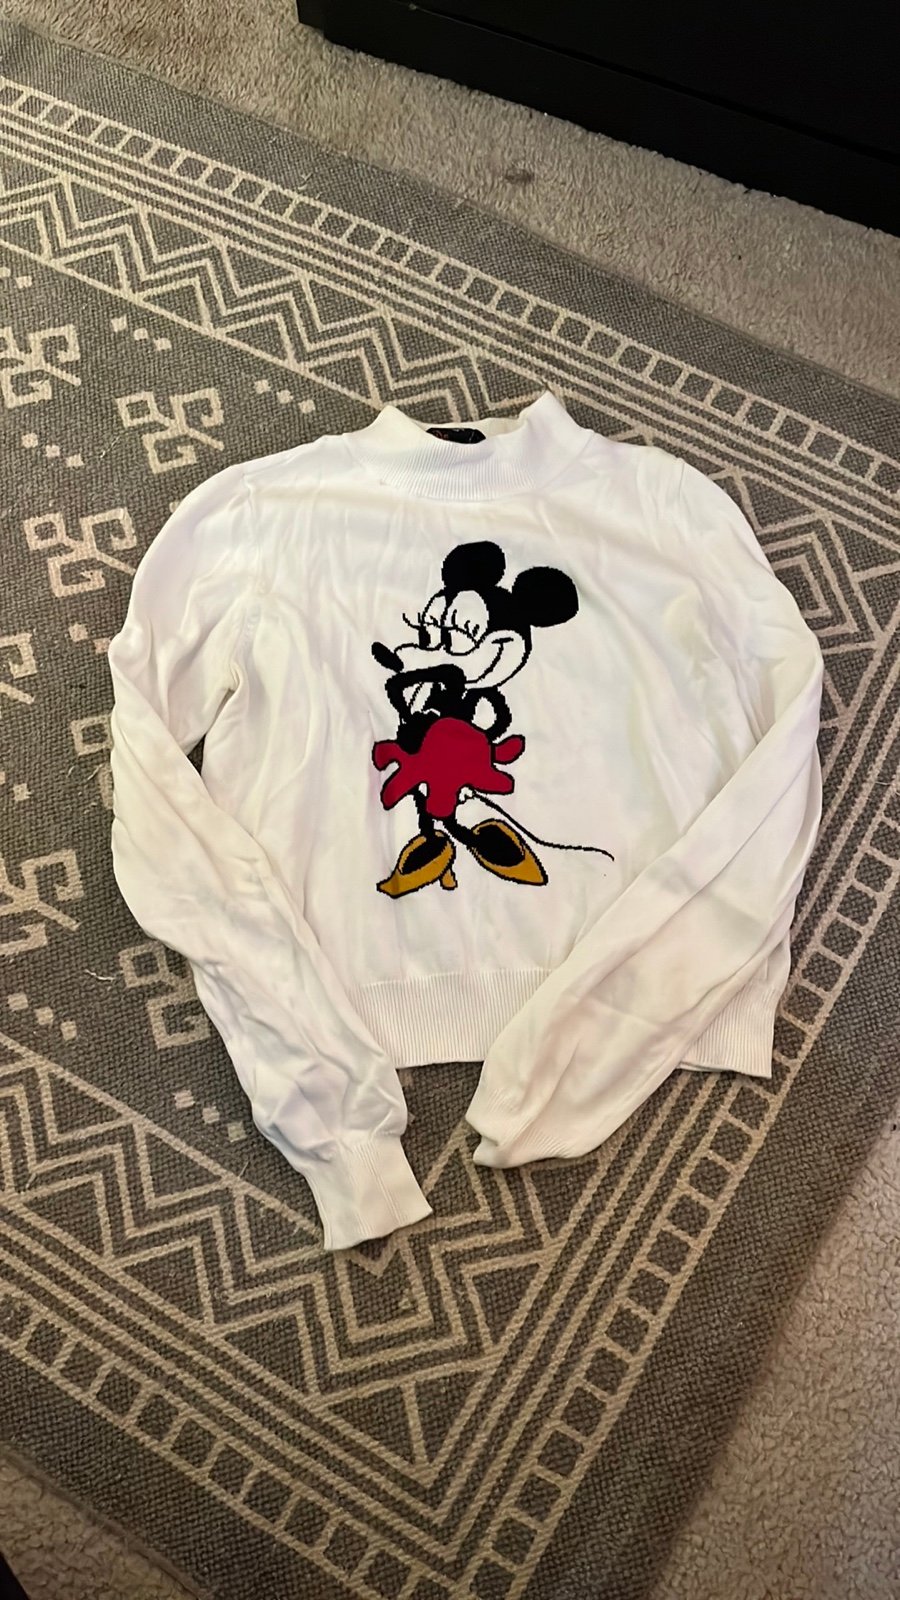 Beautiful Minnie Mouse Vintage Look Sweater hX56hVkXO Great